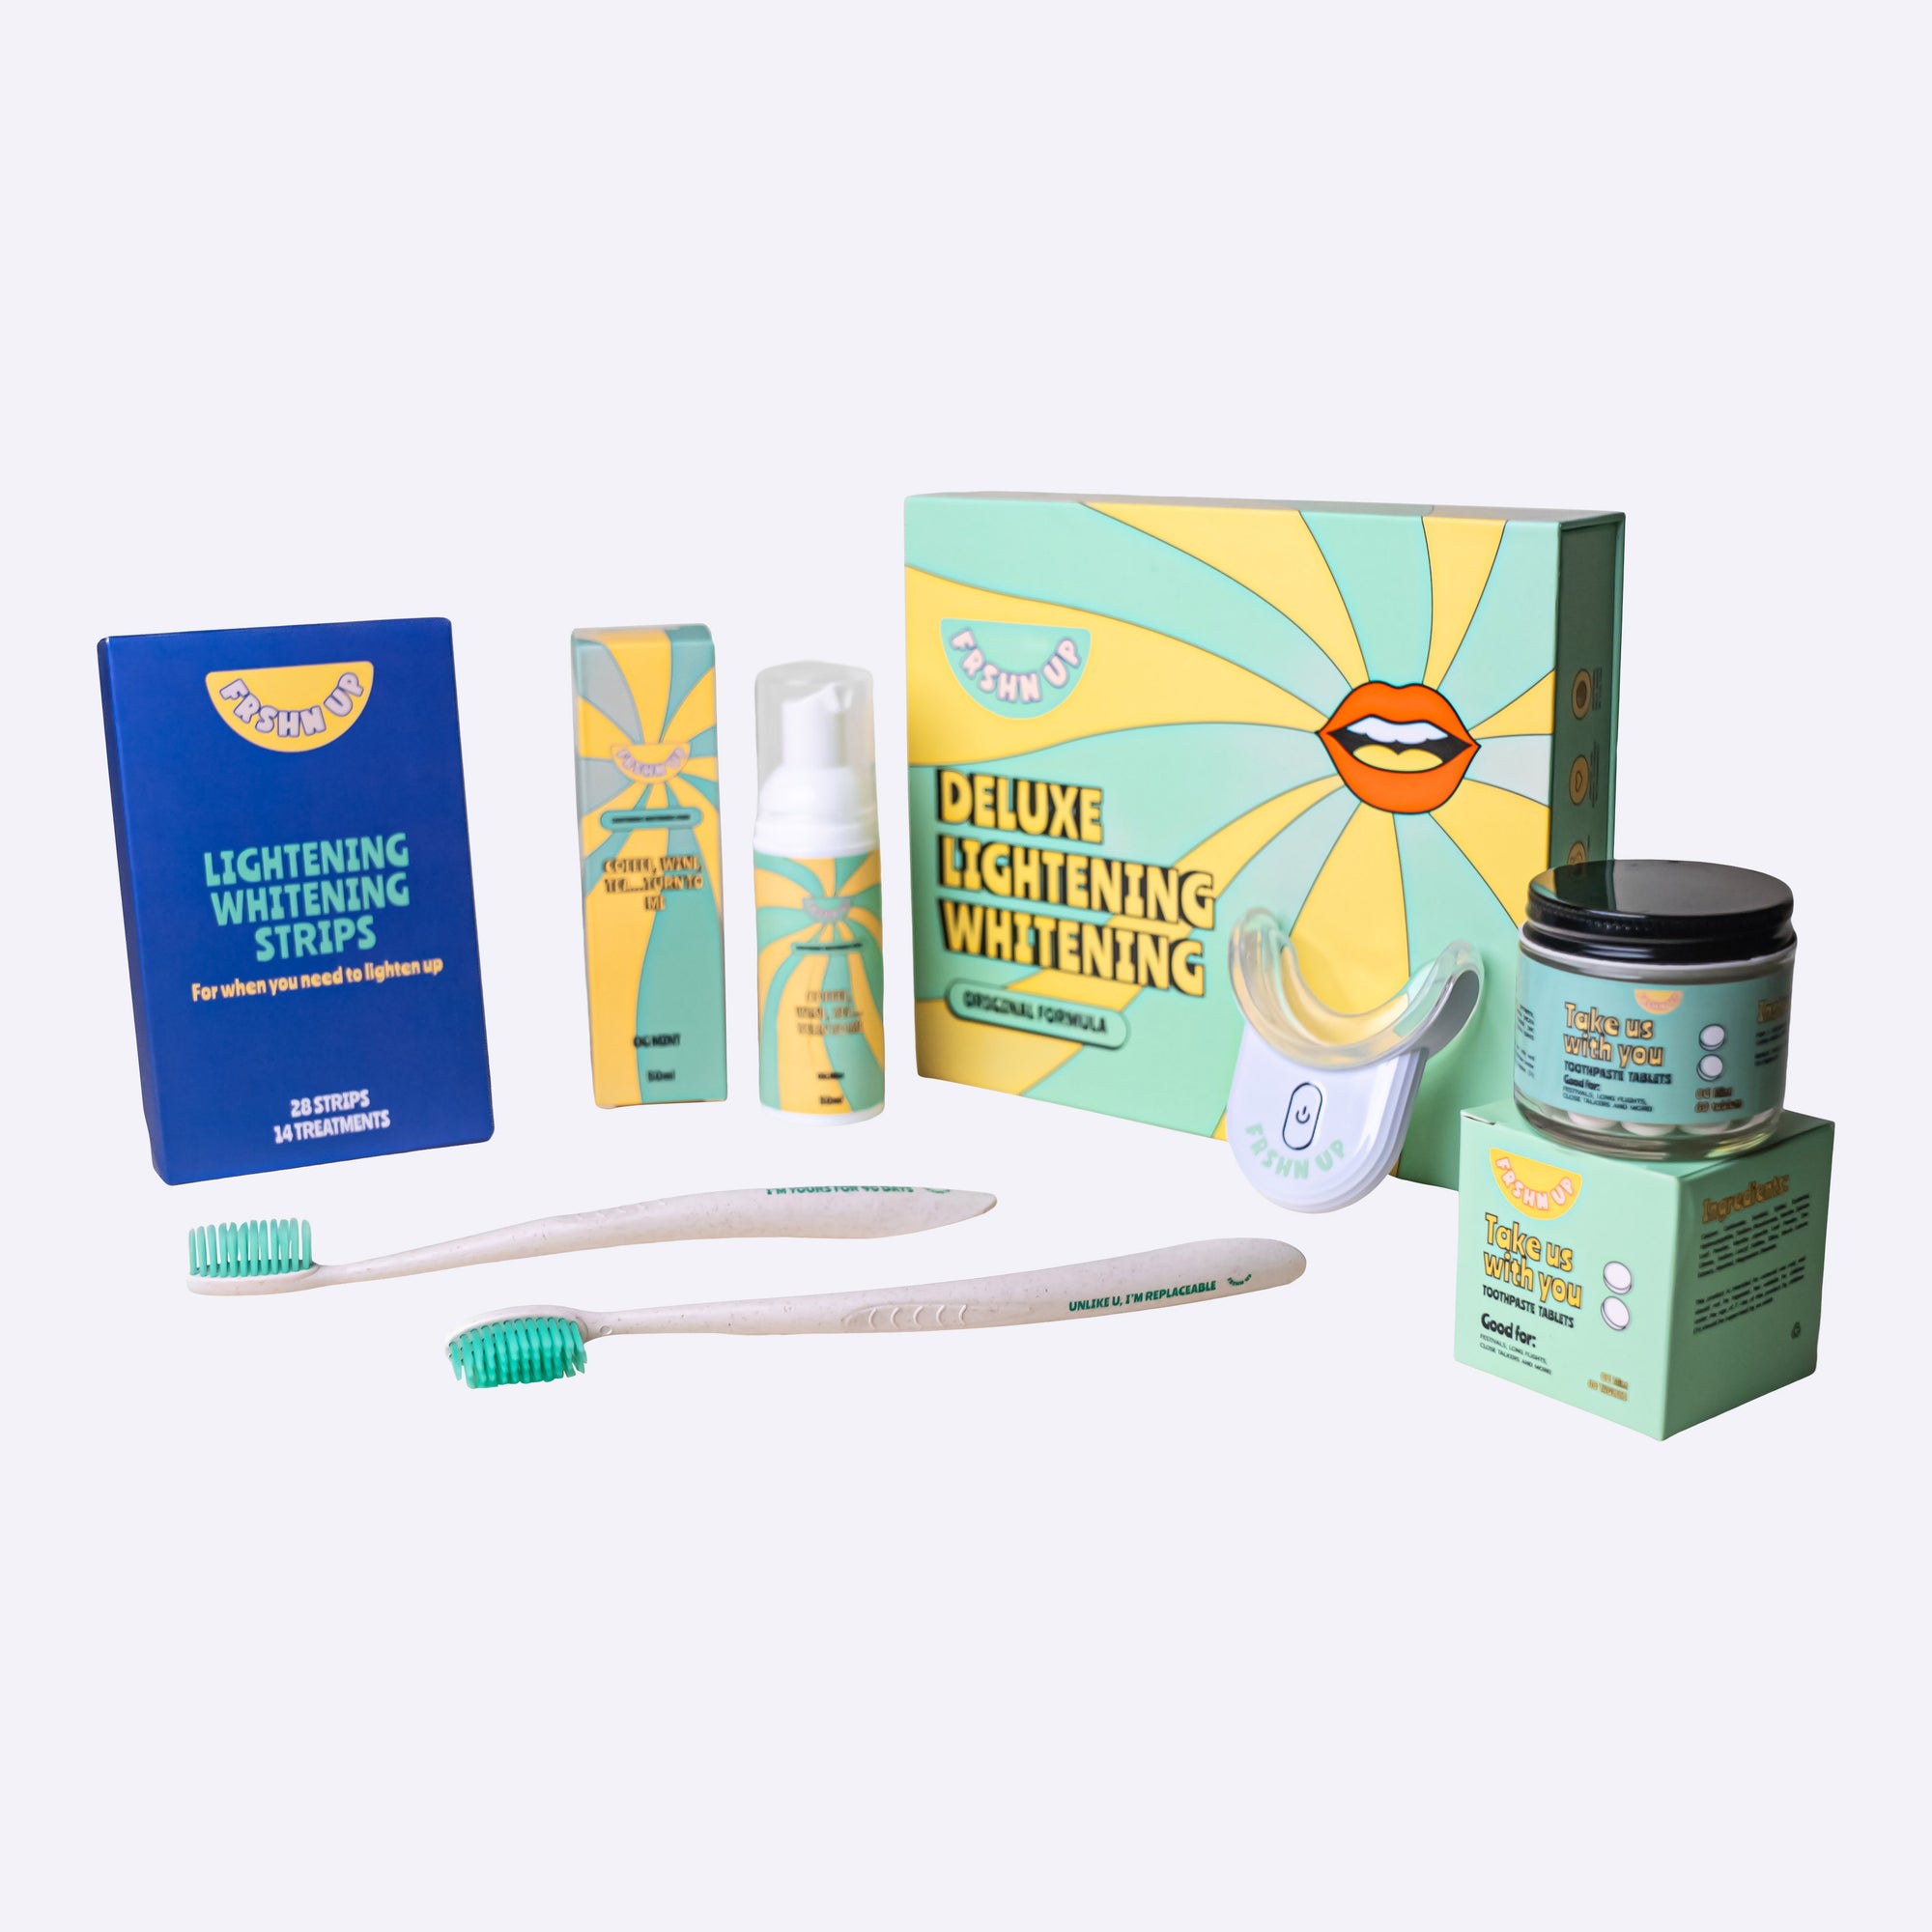 A comprehensive collection of FRSHN UP Ultimate Lightening Whitening Vault items, including a toothbrush and toothpaste, are displayed on a table.